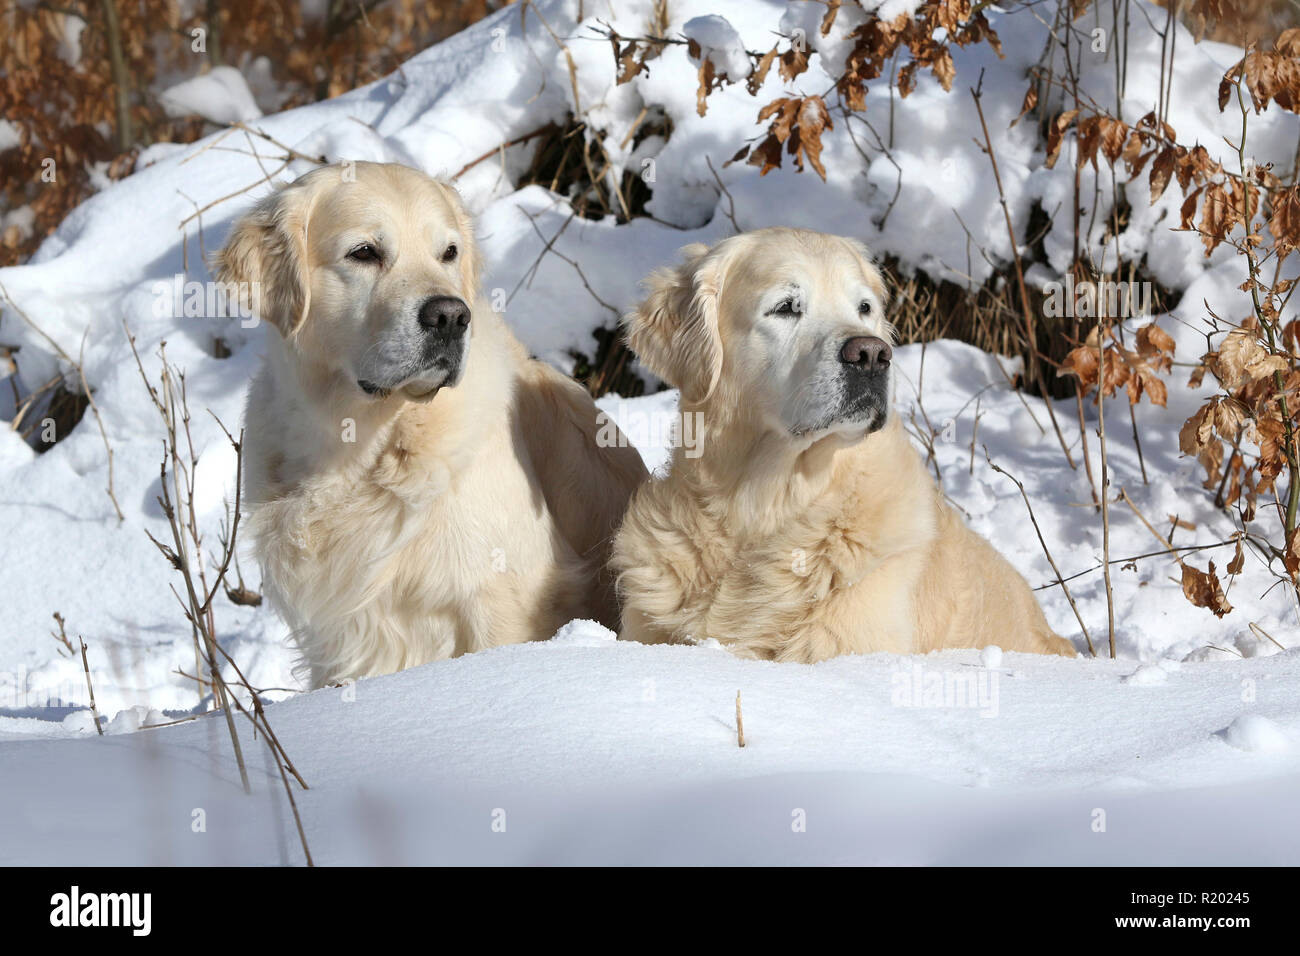 Golden Retriever. Uncle (10 years old, left) and nephew (5 years old, right) sitting next to each other in snow. Germany Stock Photo